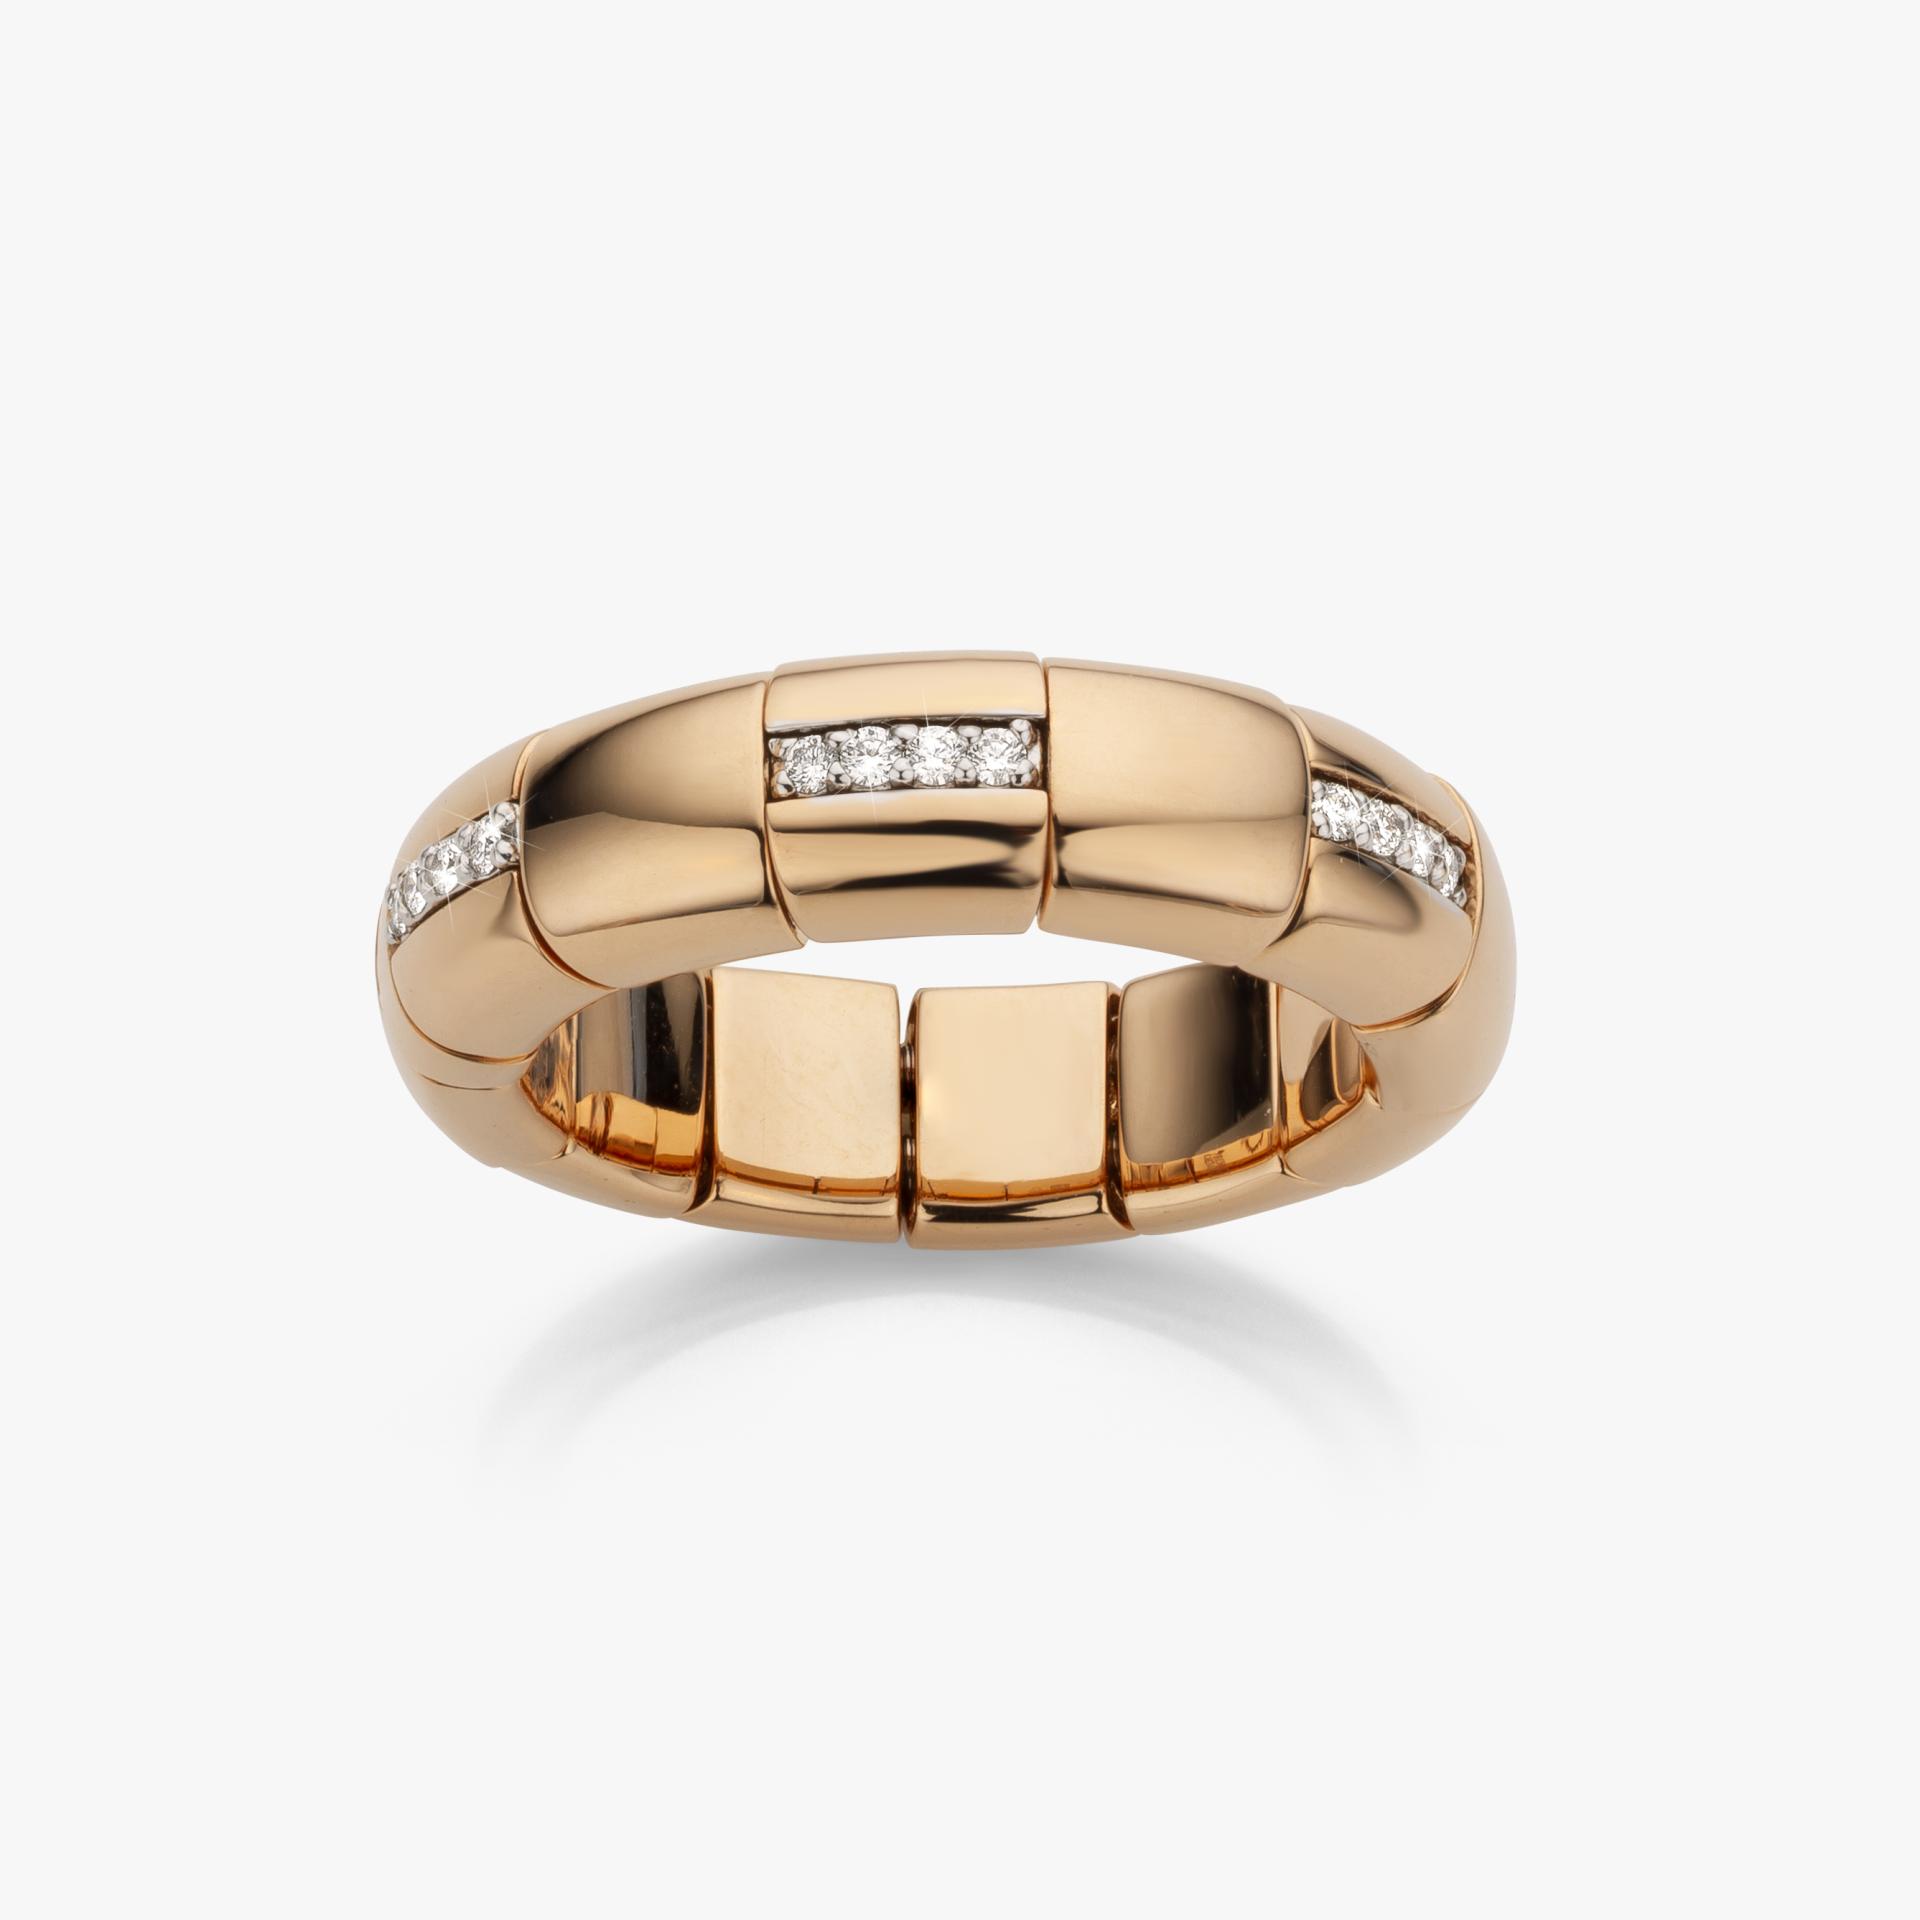 Rose gold ring Pura Oro set with brilliants. made by Roberto Demeglio